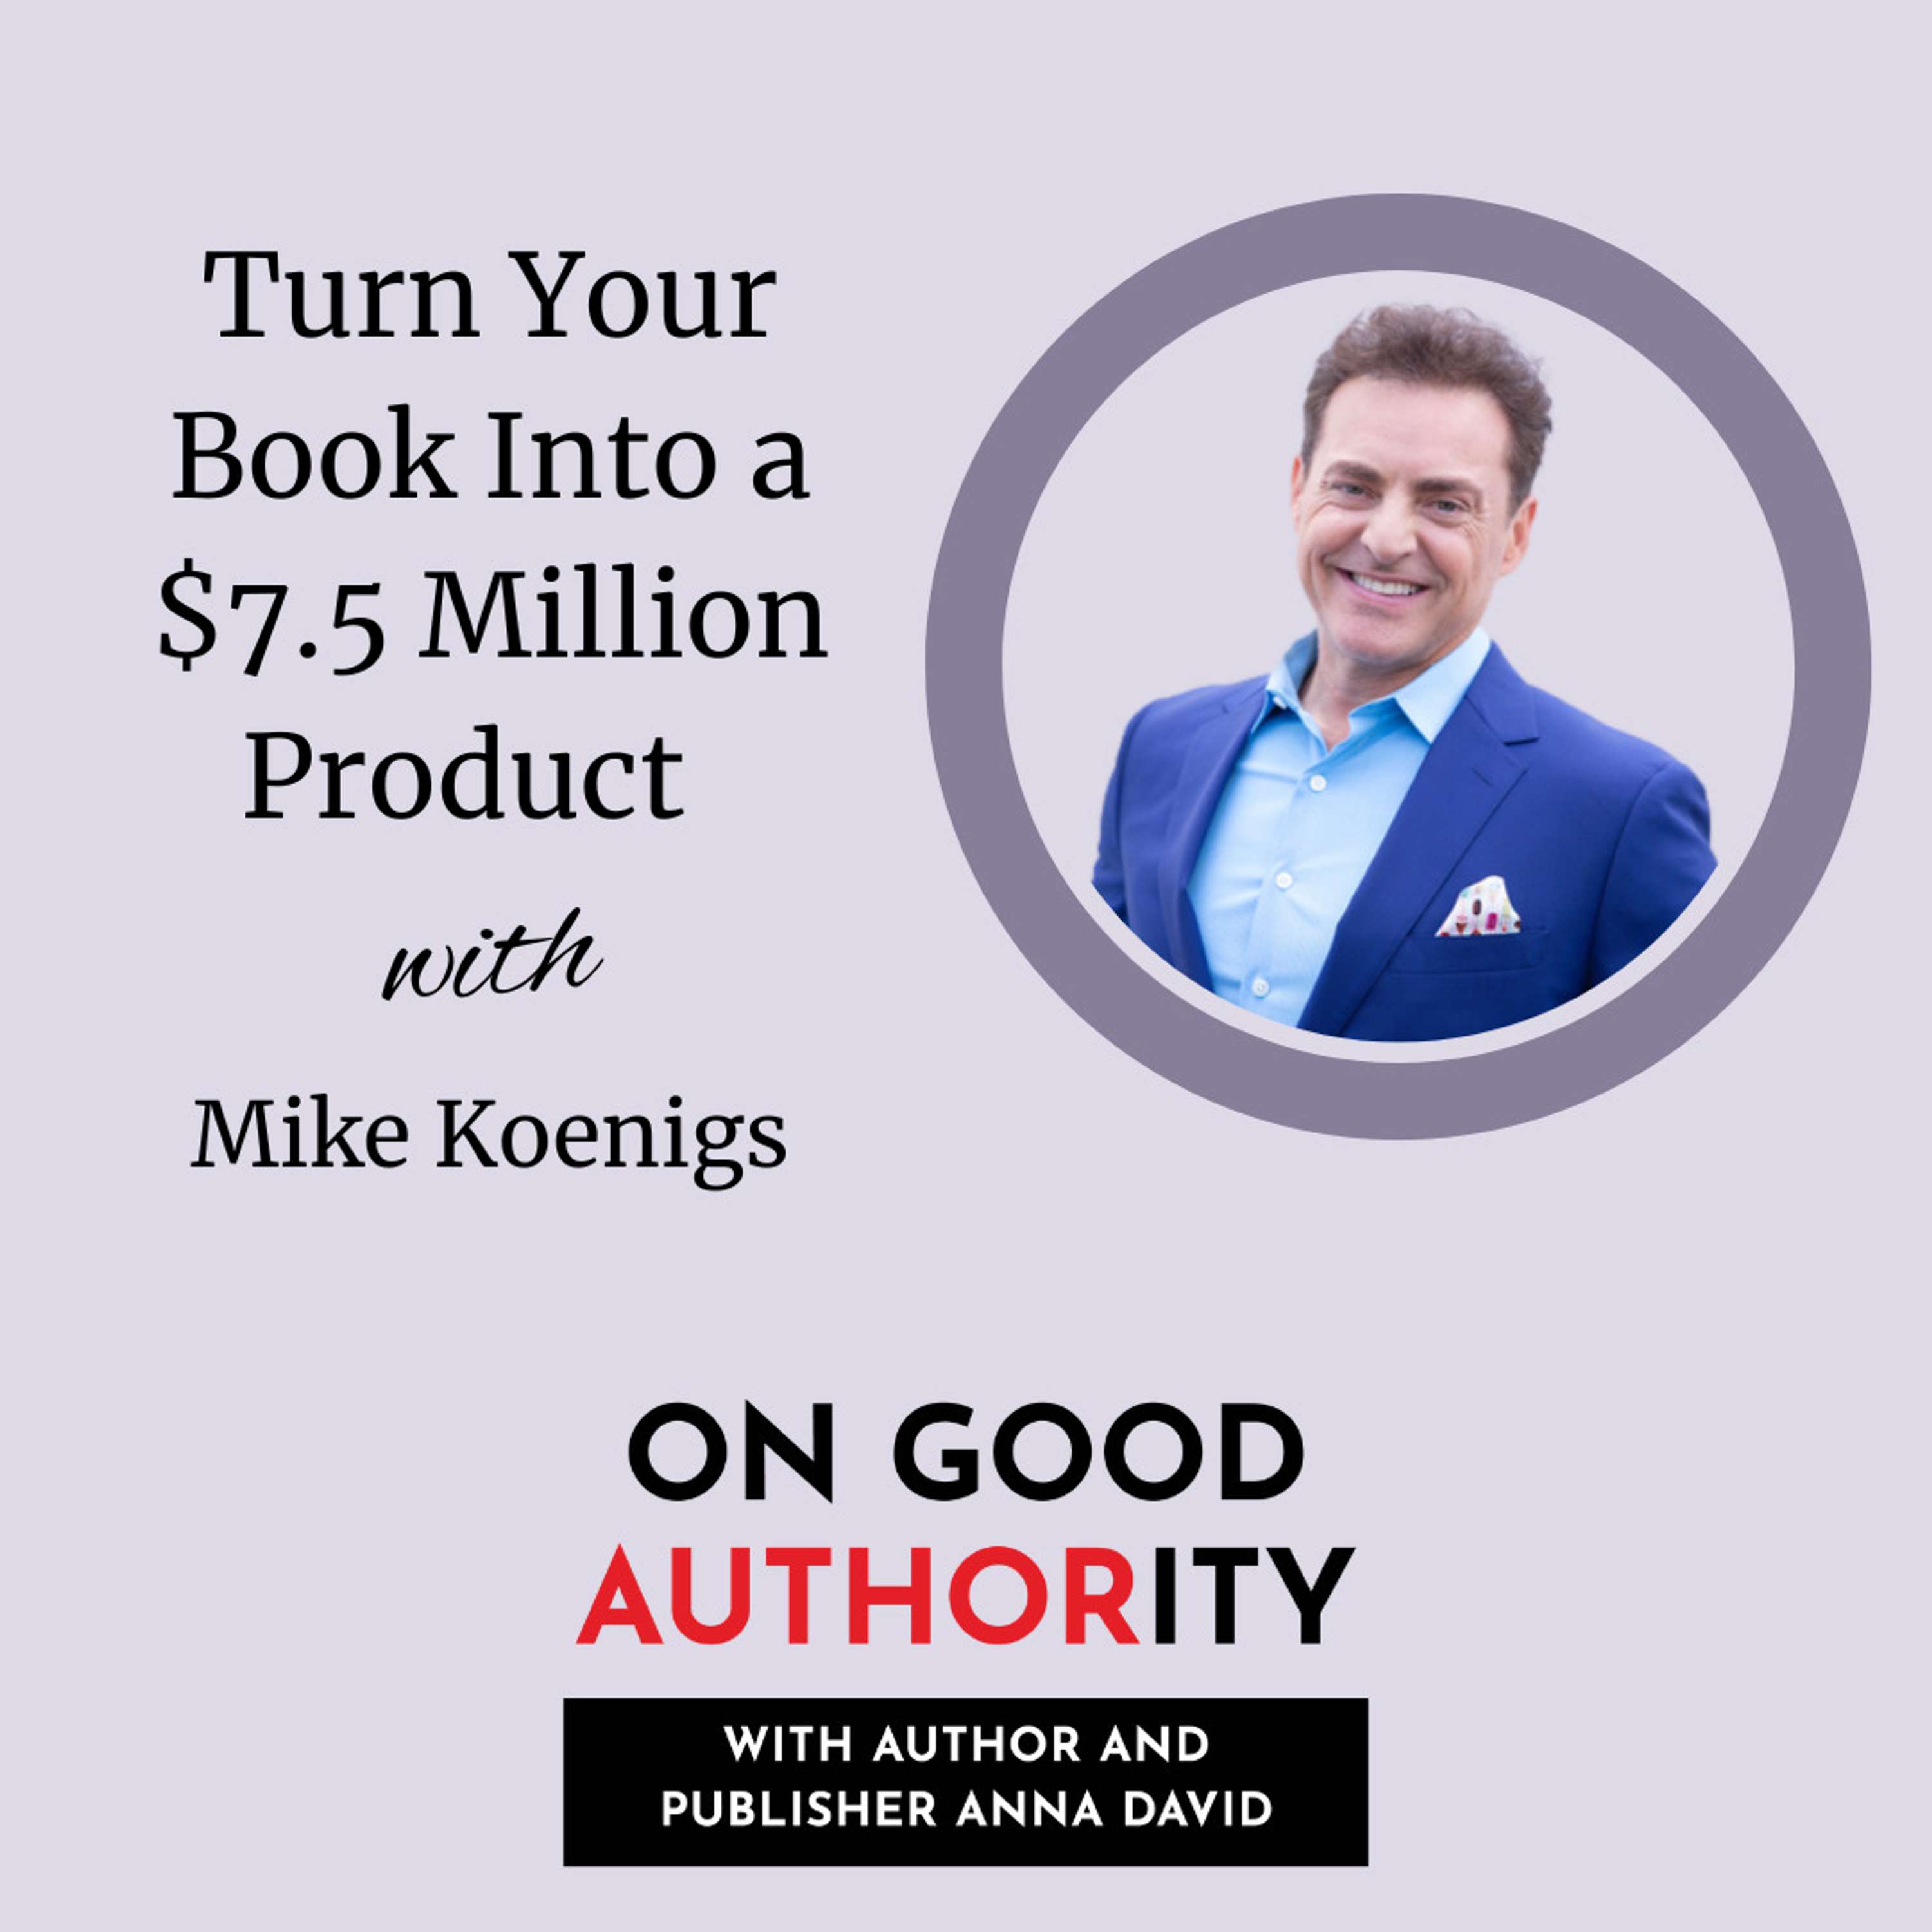 Turn Your Book Into a $7.5 Million Product with Mike Koenigs